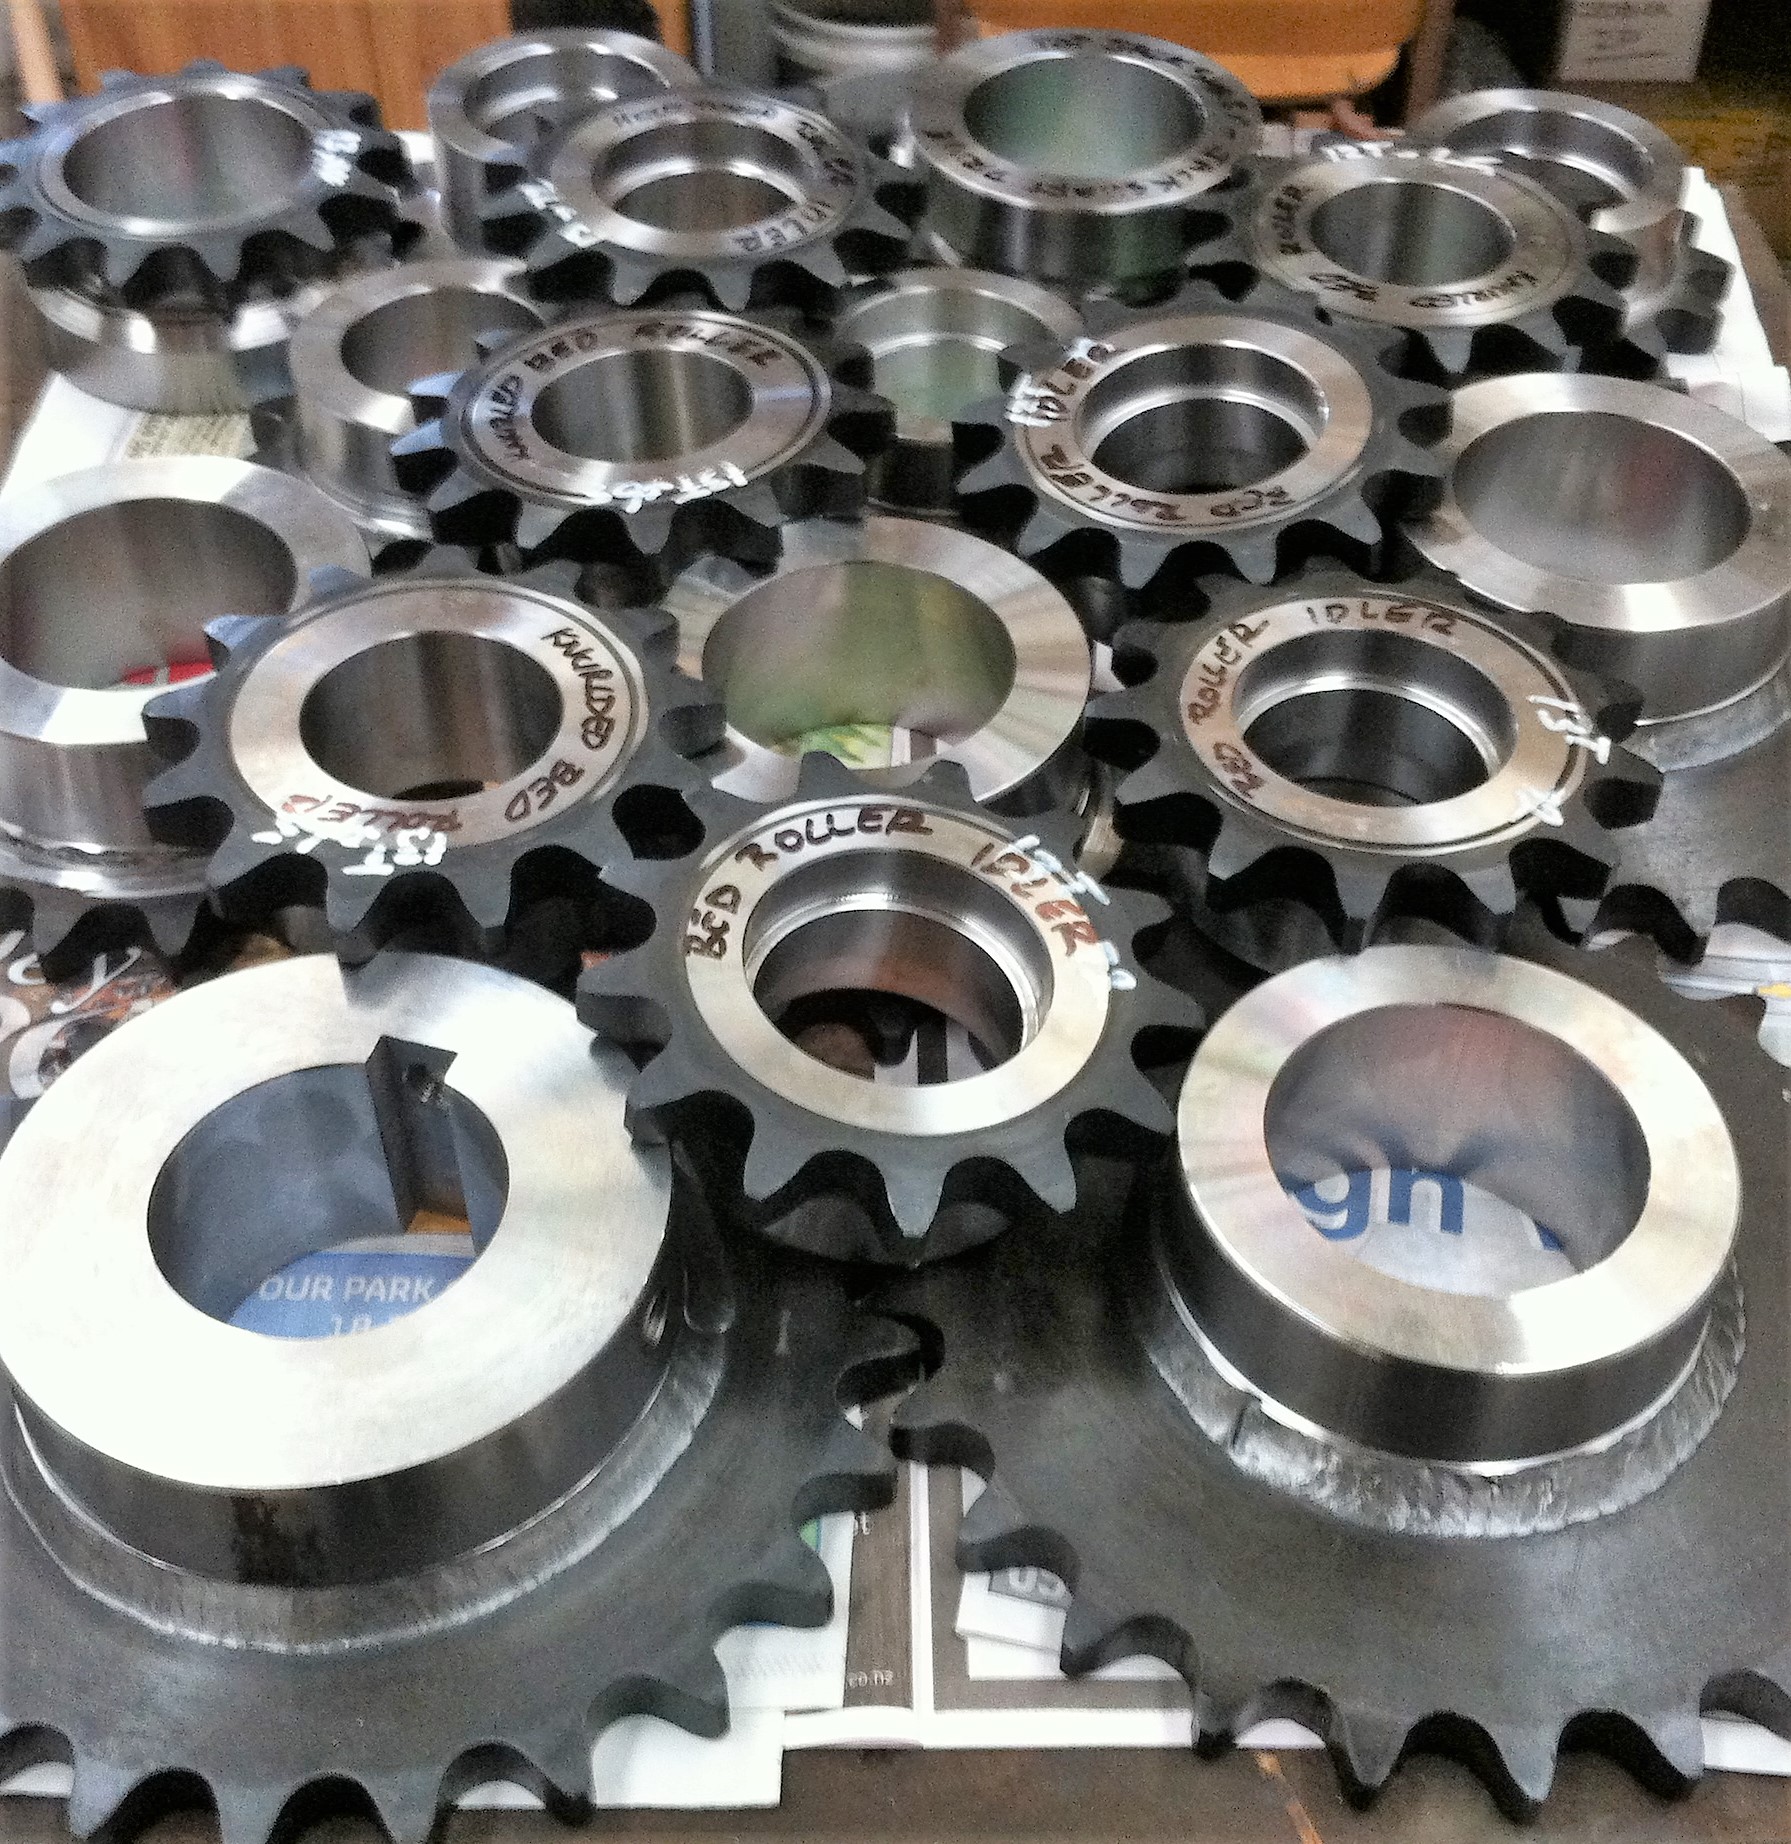 Close-up photo of several metal sprockets with various sizes, hole patterns, and teeth counts, arranged on a metal workbench.